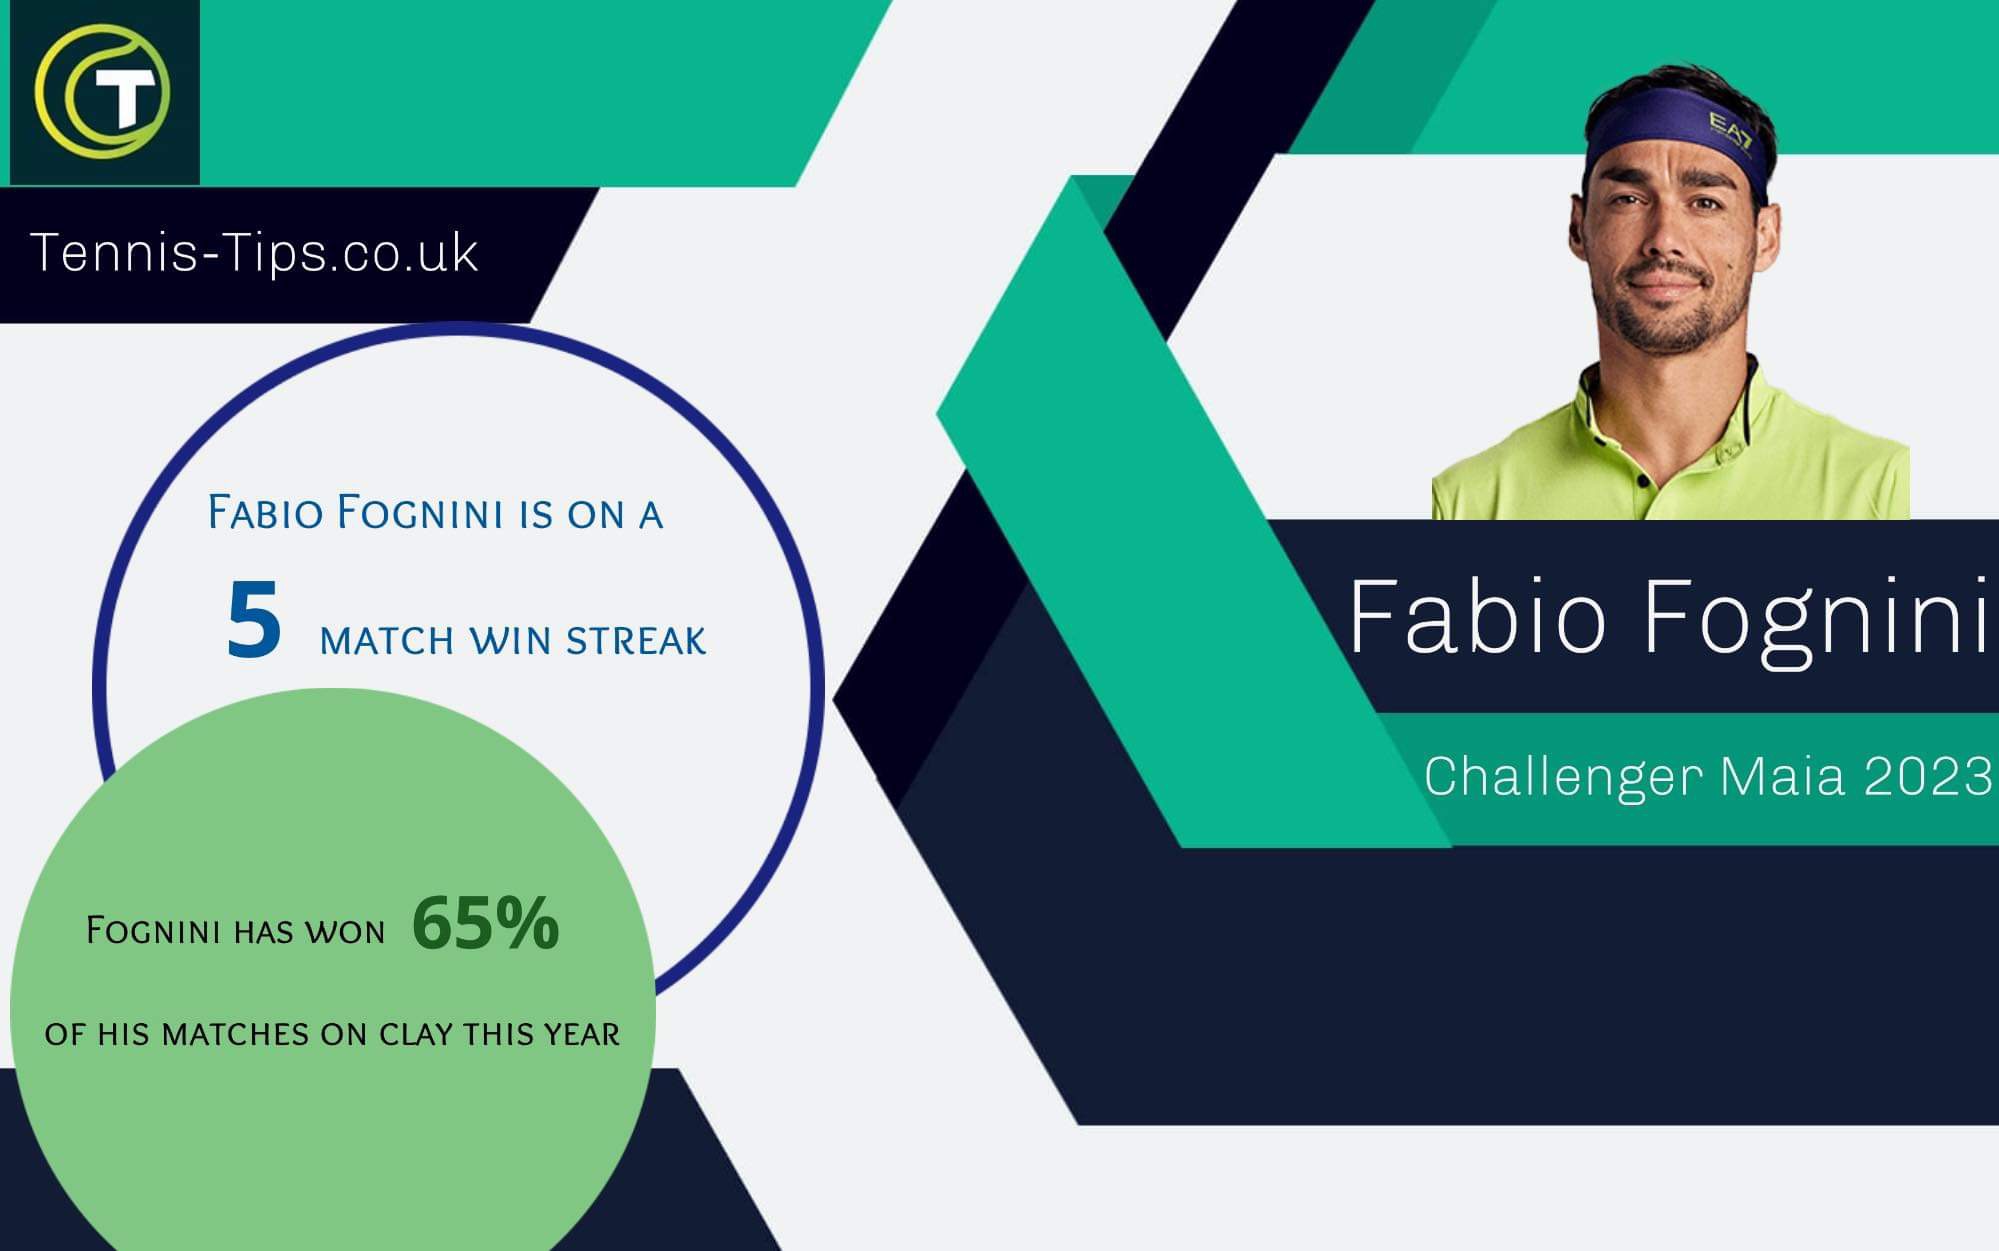 Infographic showcasing Fognini form ahead of Challenger Maia